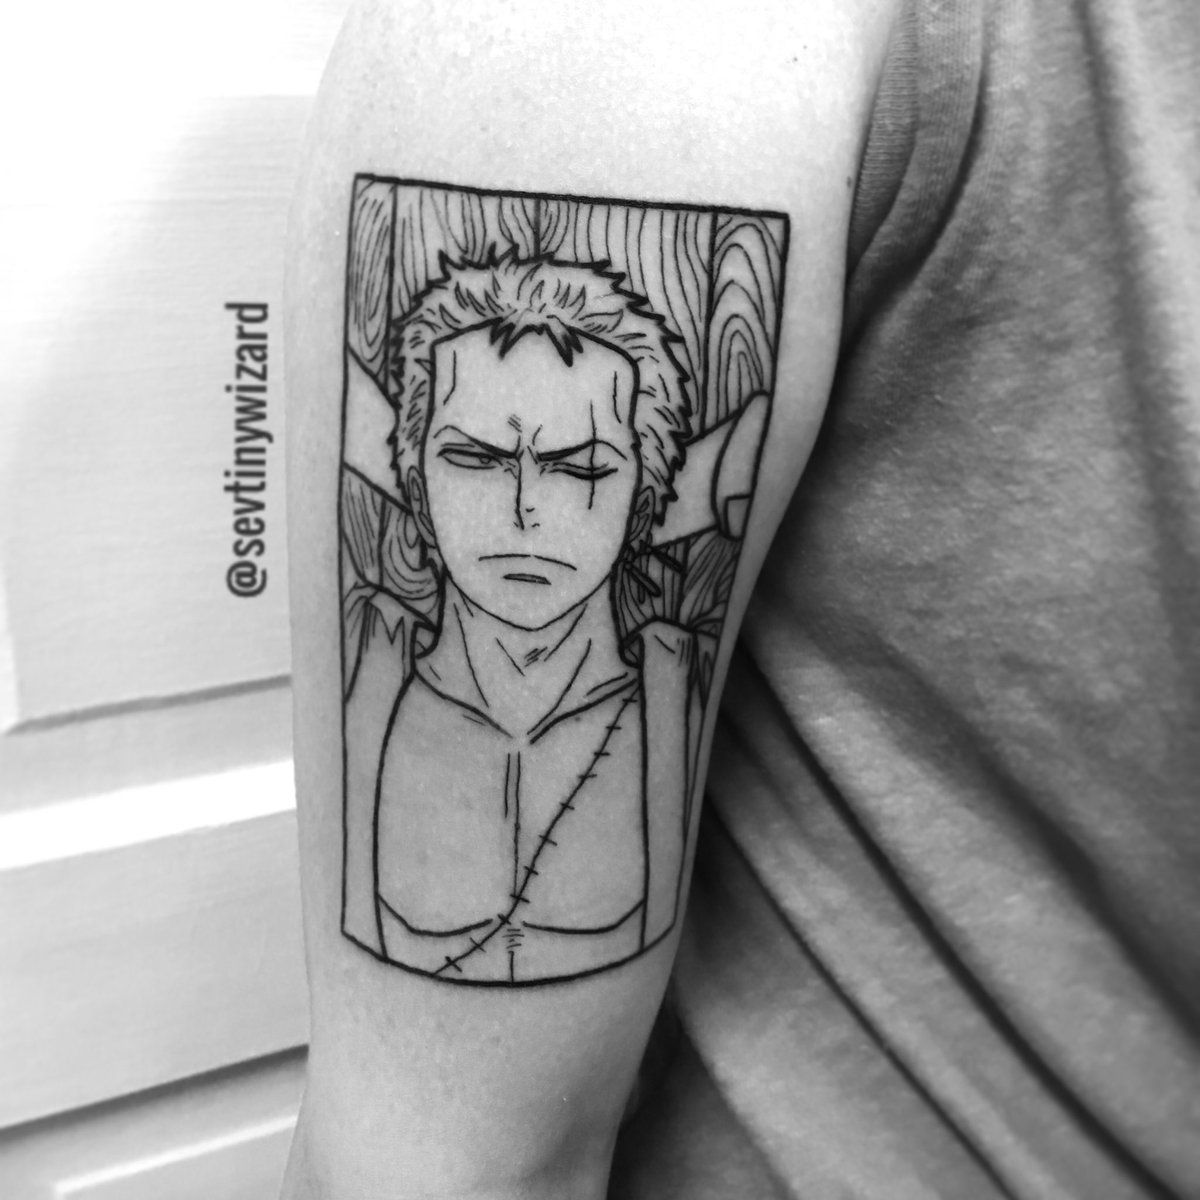 Haunted Gameboy Sp I Was Gonna Wait To Post This Tattoo From Today But Fuck It Roronoa Zoro T Co K98kz1g6fn Twitter